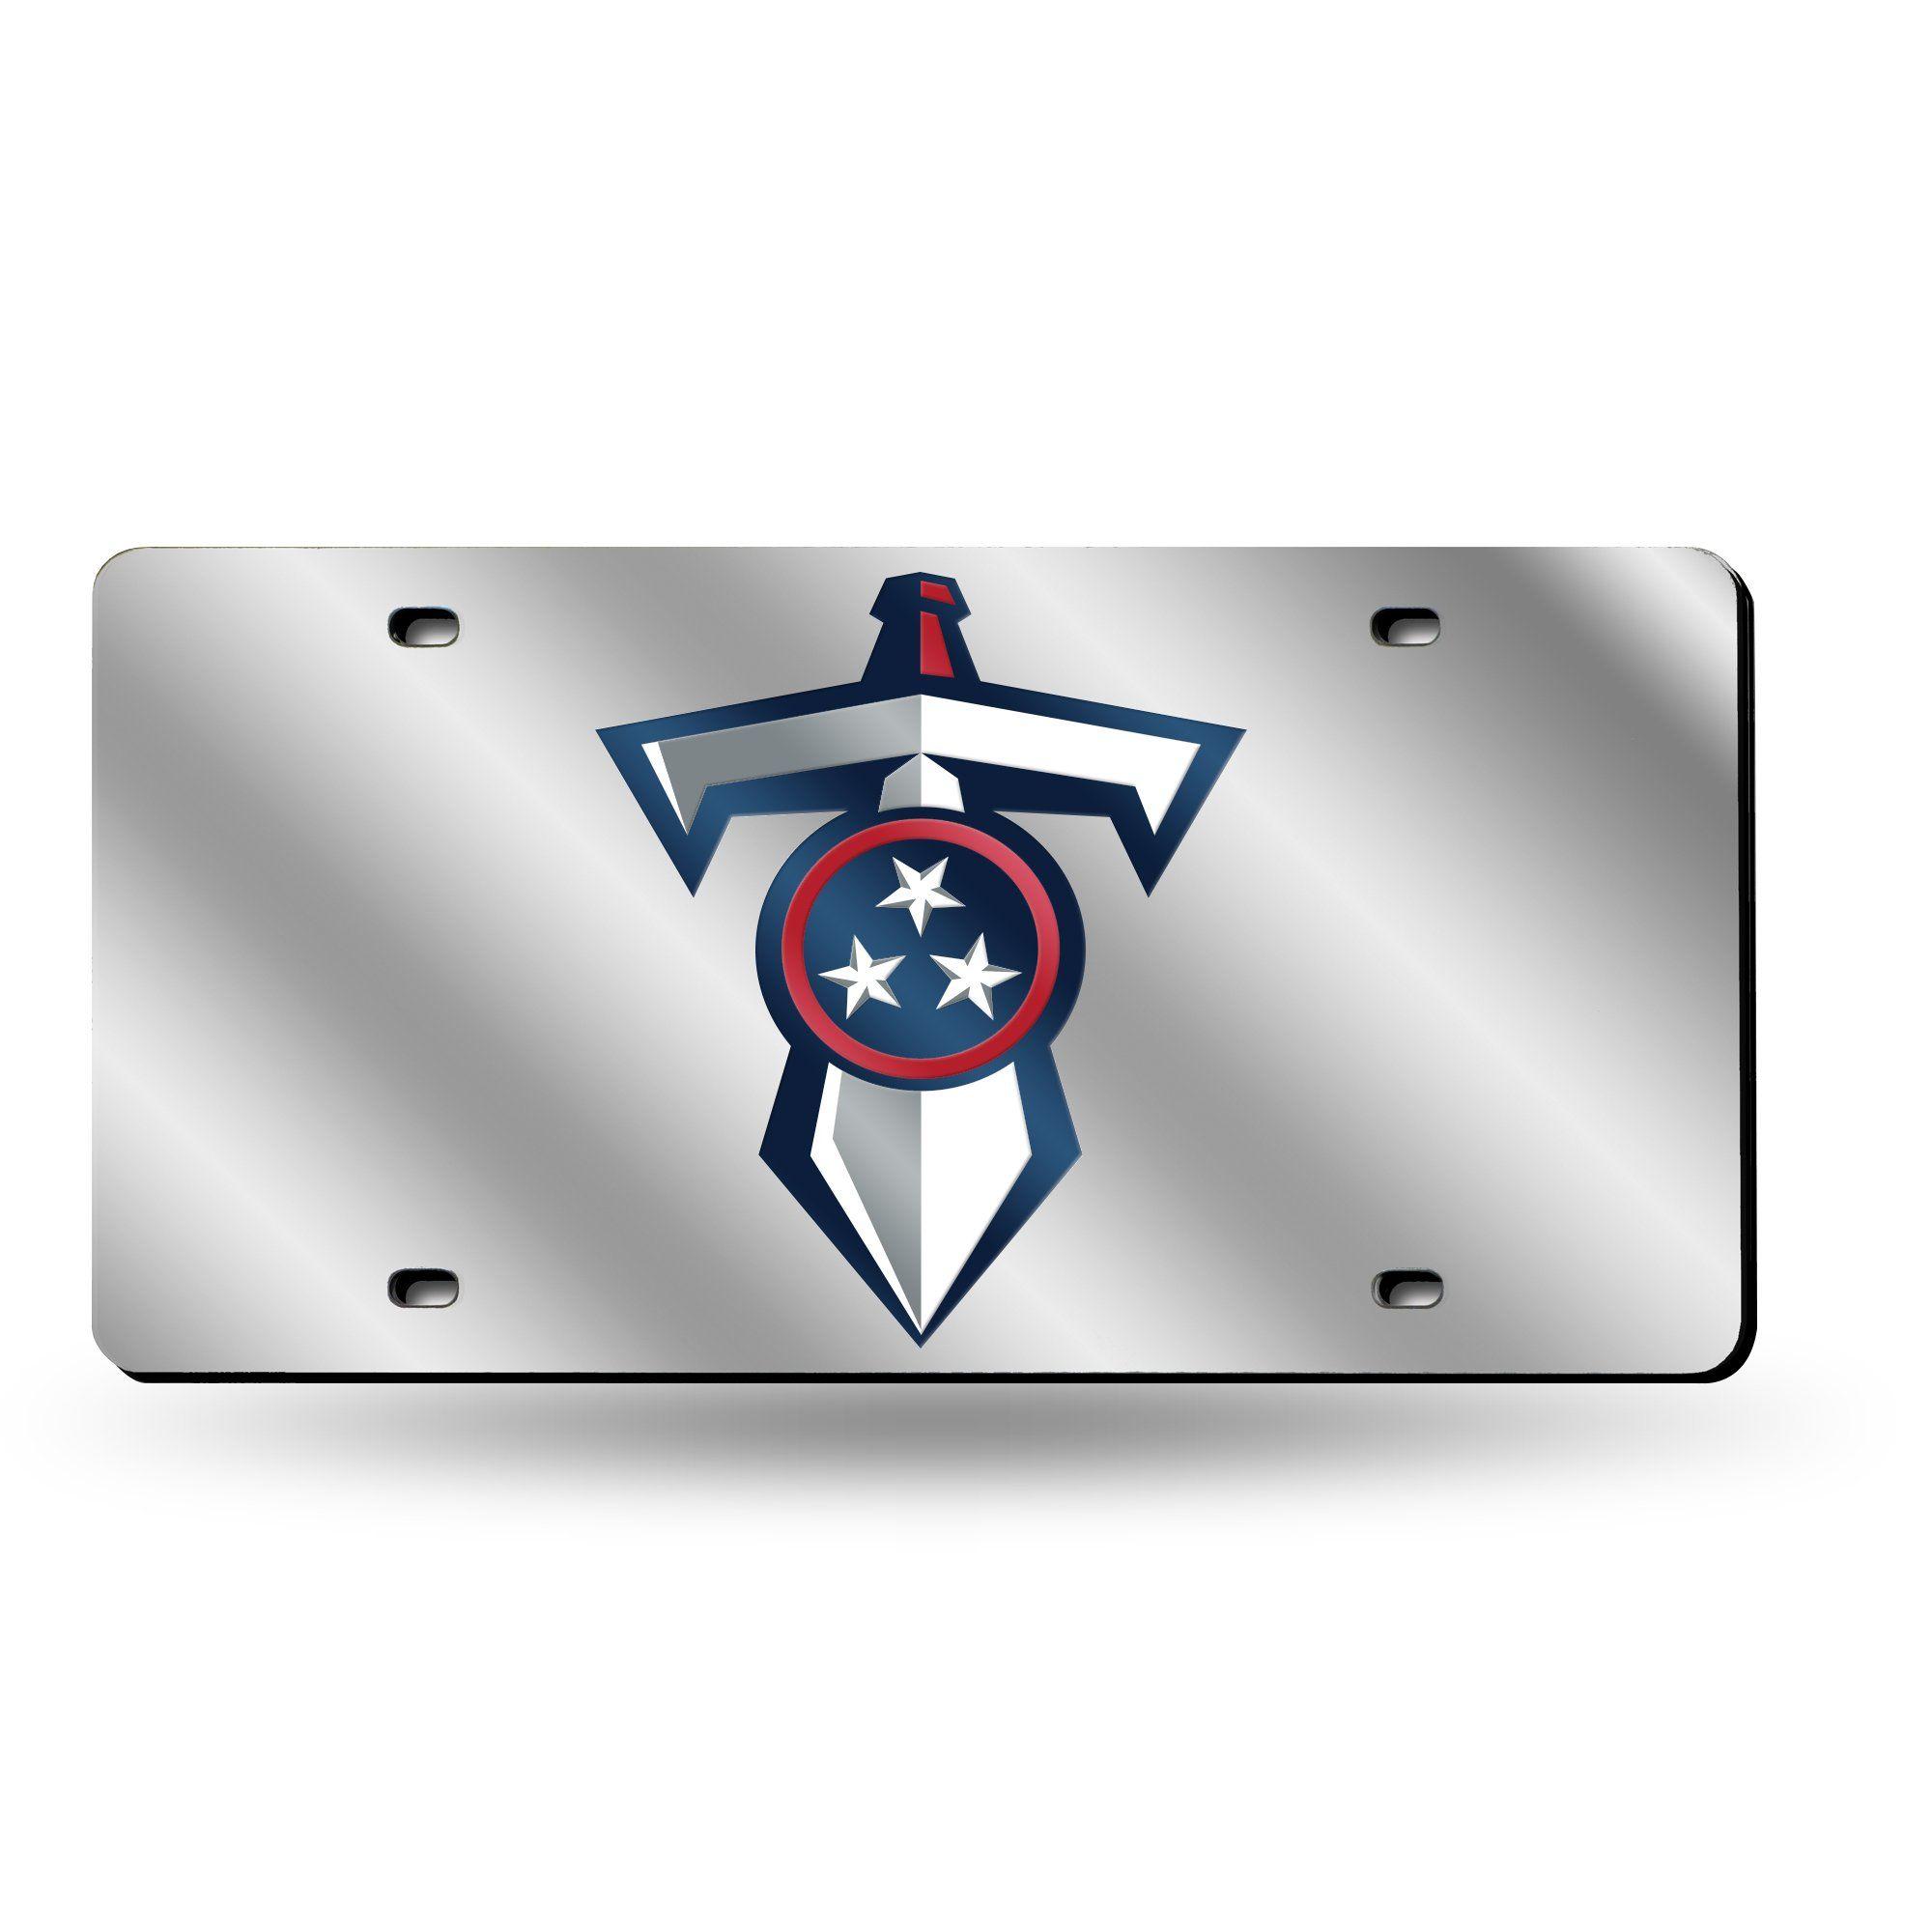 Titans Sword Logo - NFL Tennessee Titans Shield and Sword Logo Laser License Plate Tag - S